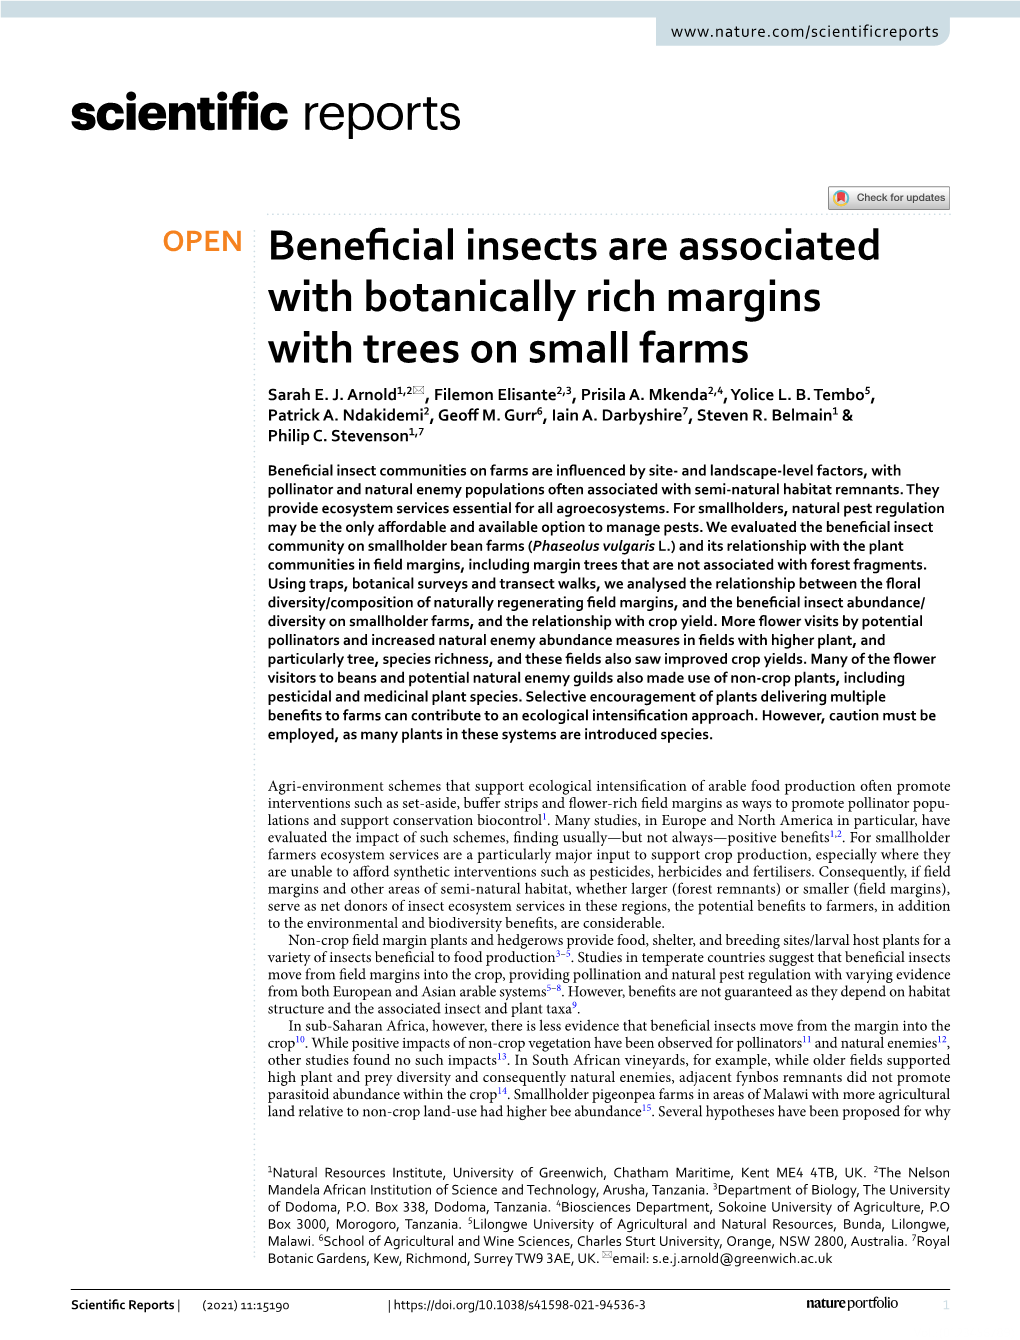 Beneficial Insects Are Associated with Botanically Rich Margins with Trees